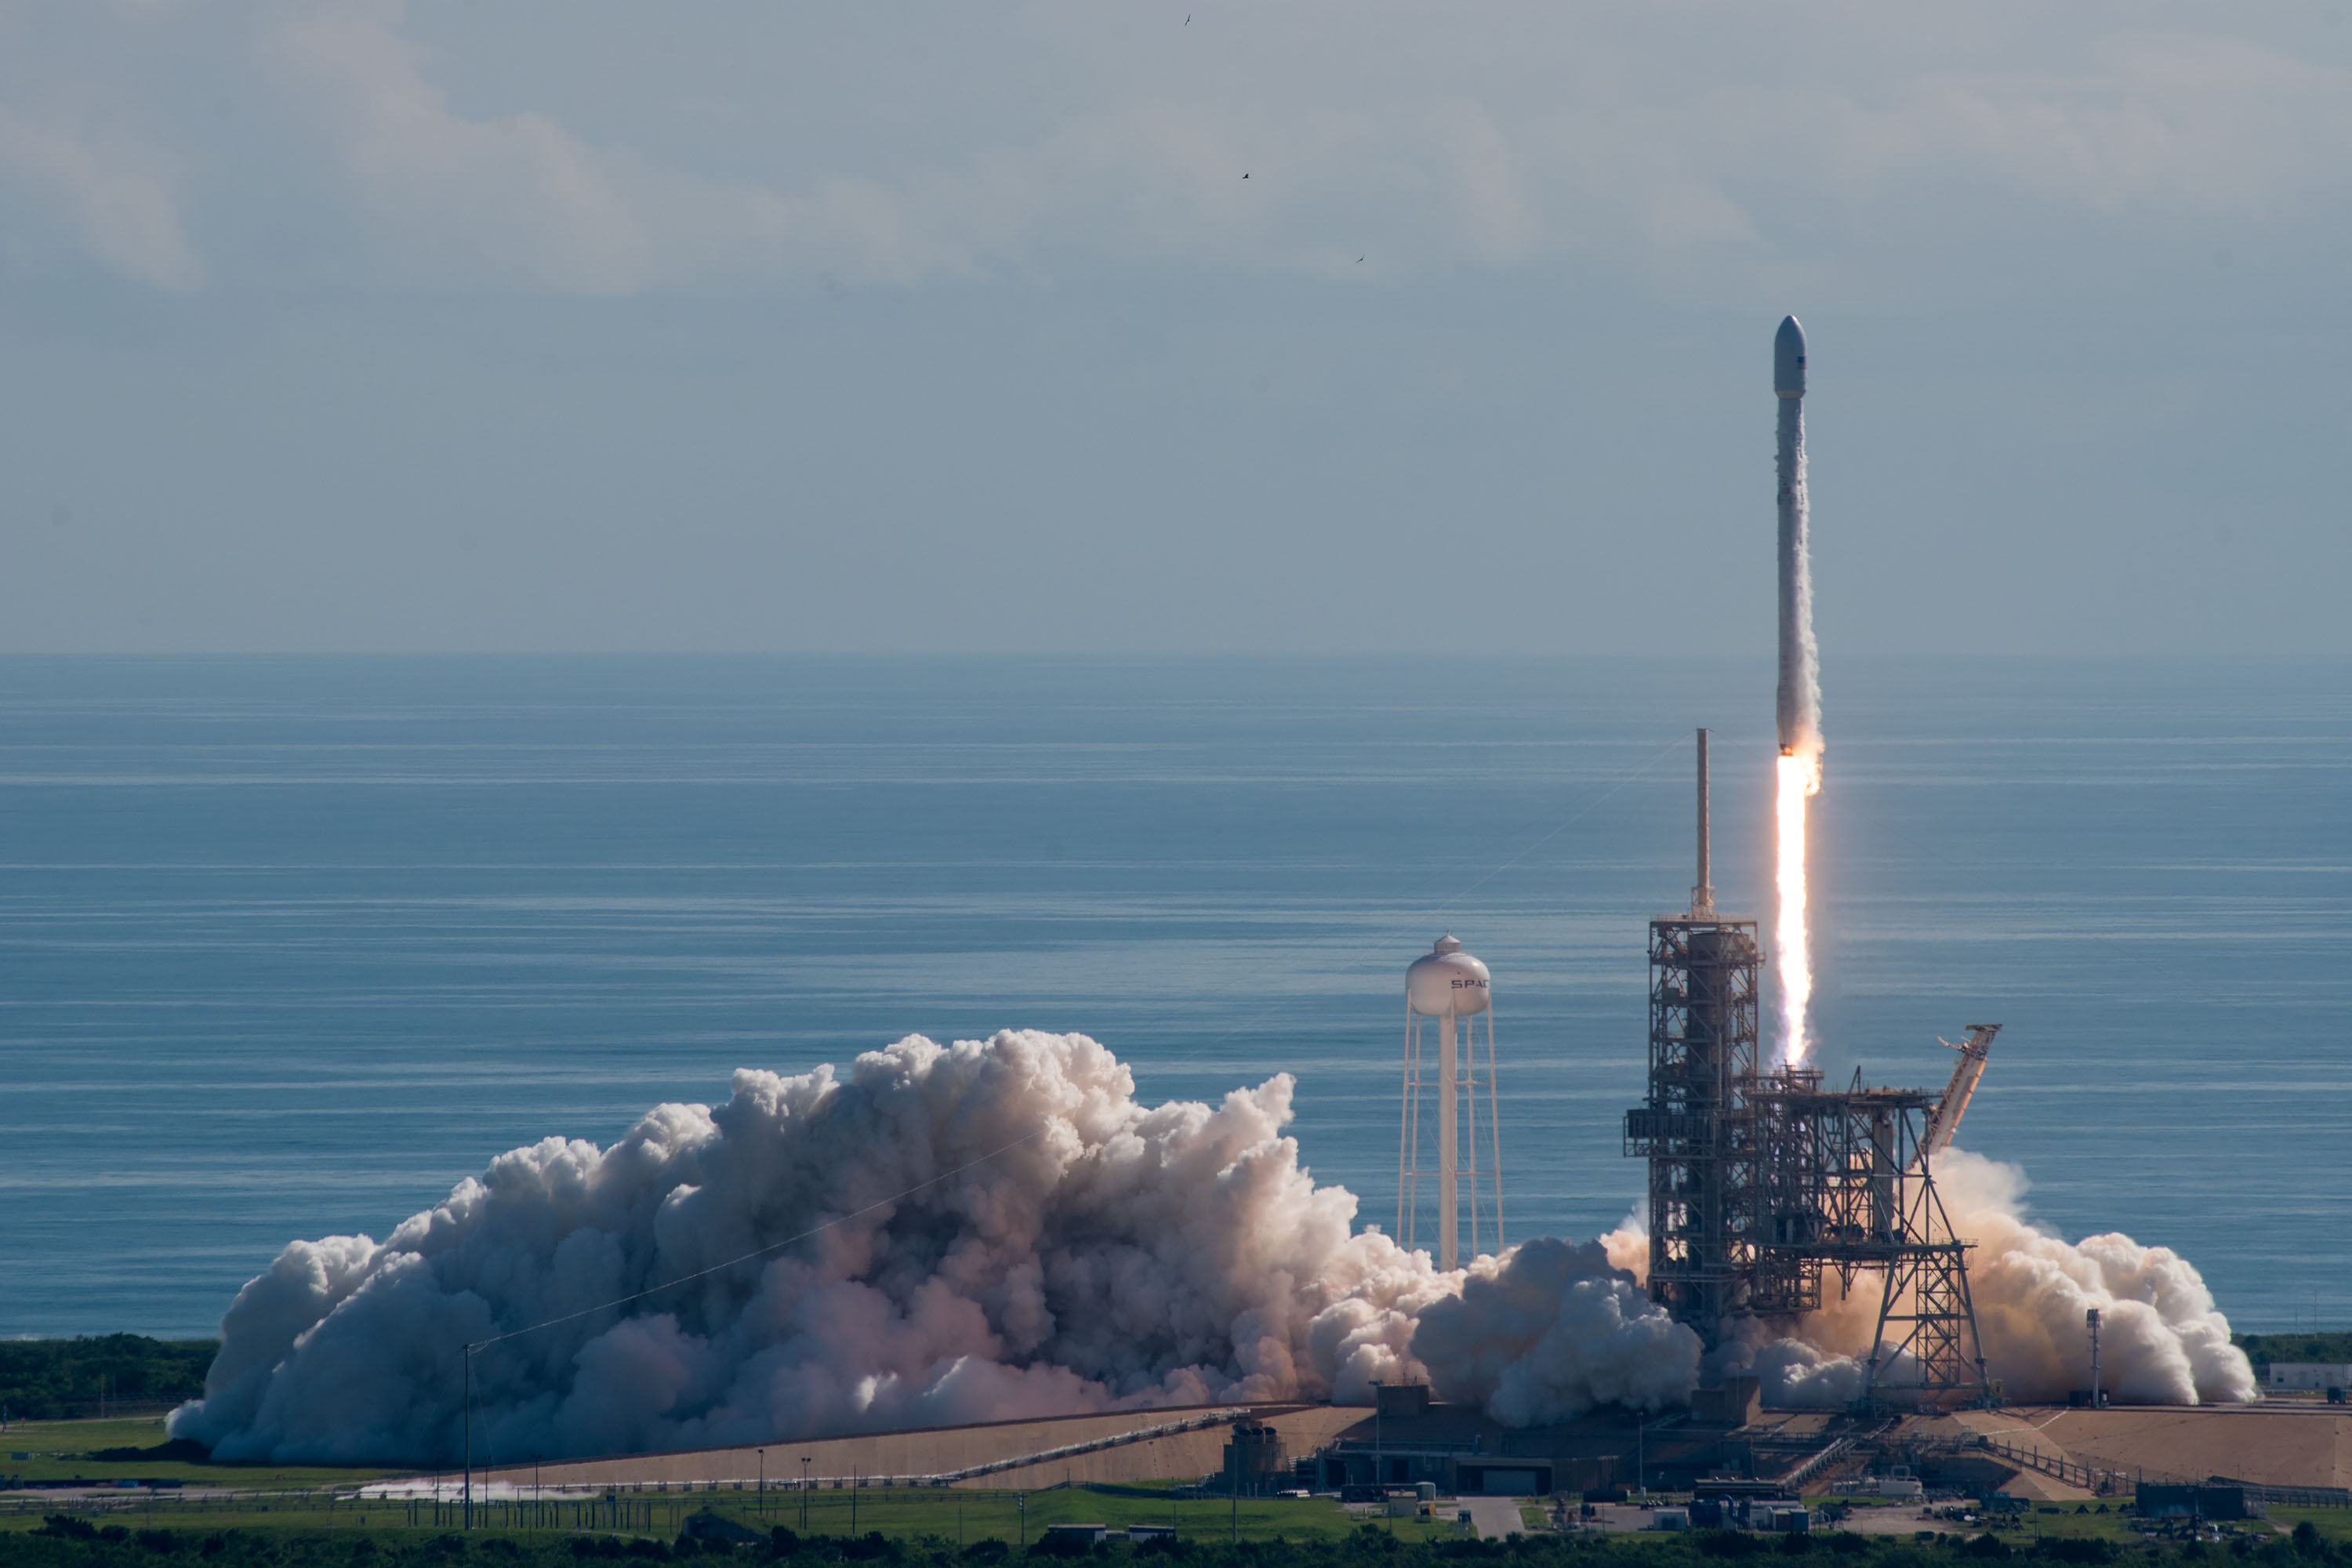 Photos: Falcon 9 Lifts Off from Florida with X-37B Space Plane – X-37B – OTV-5 ...3000 x 2000